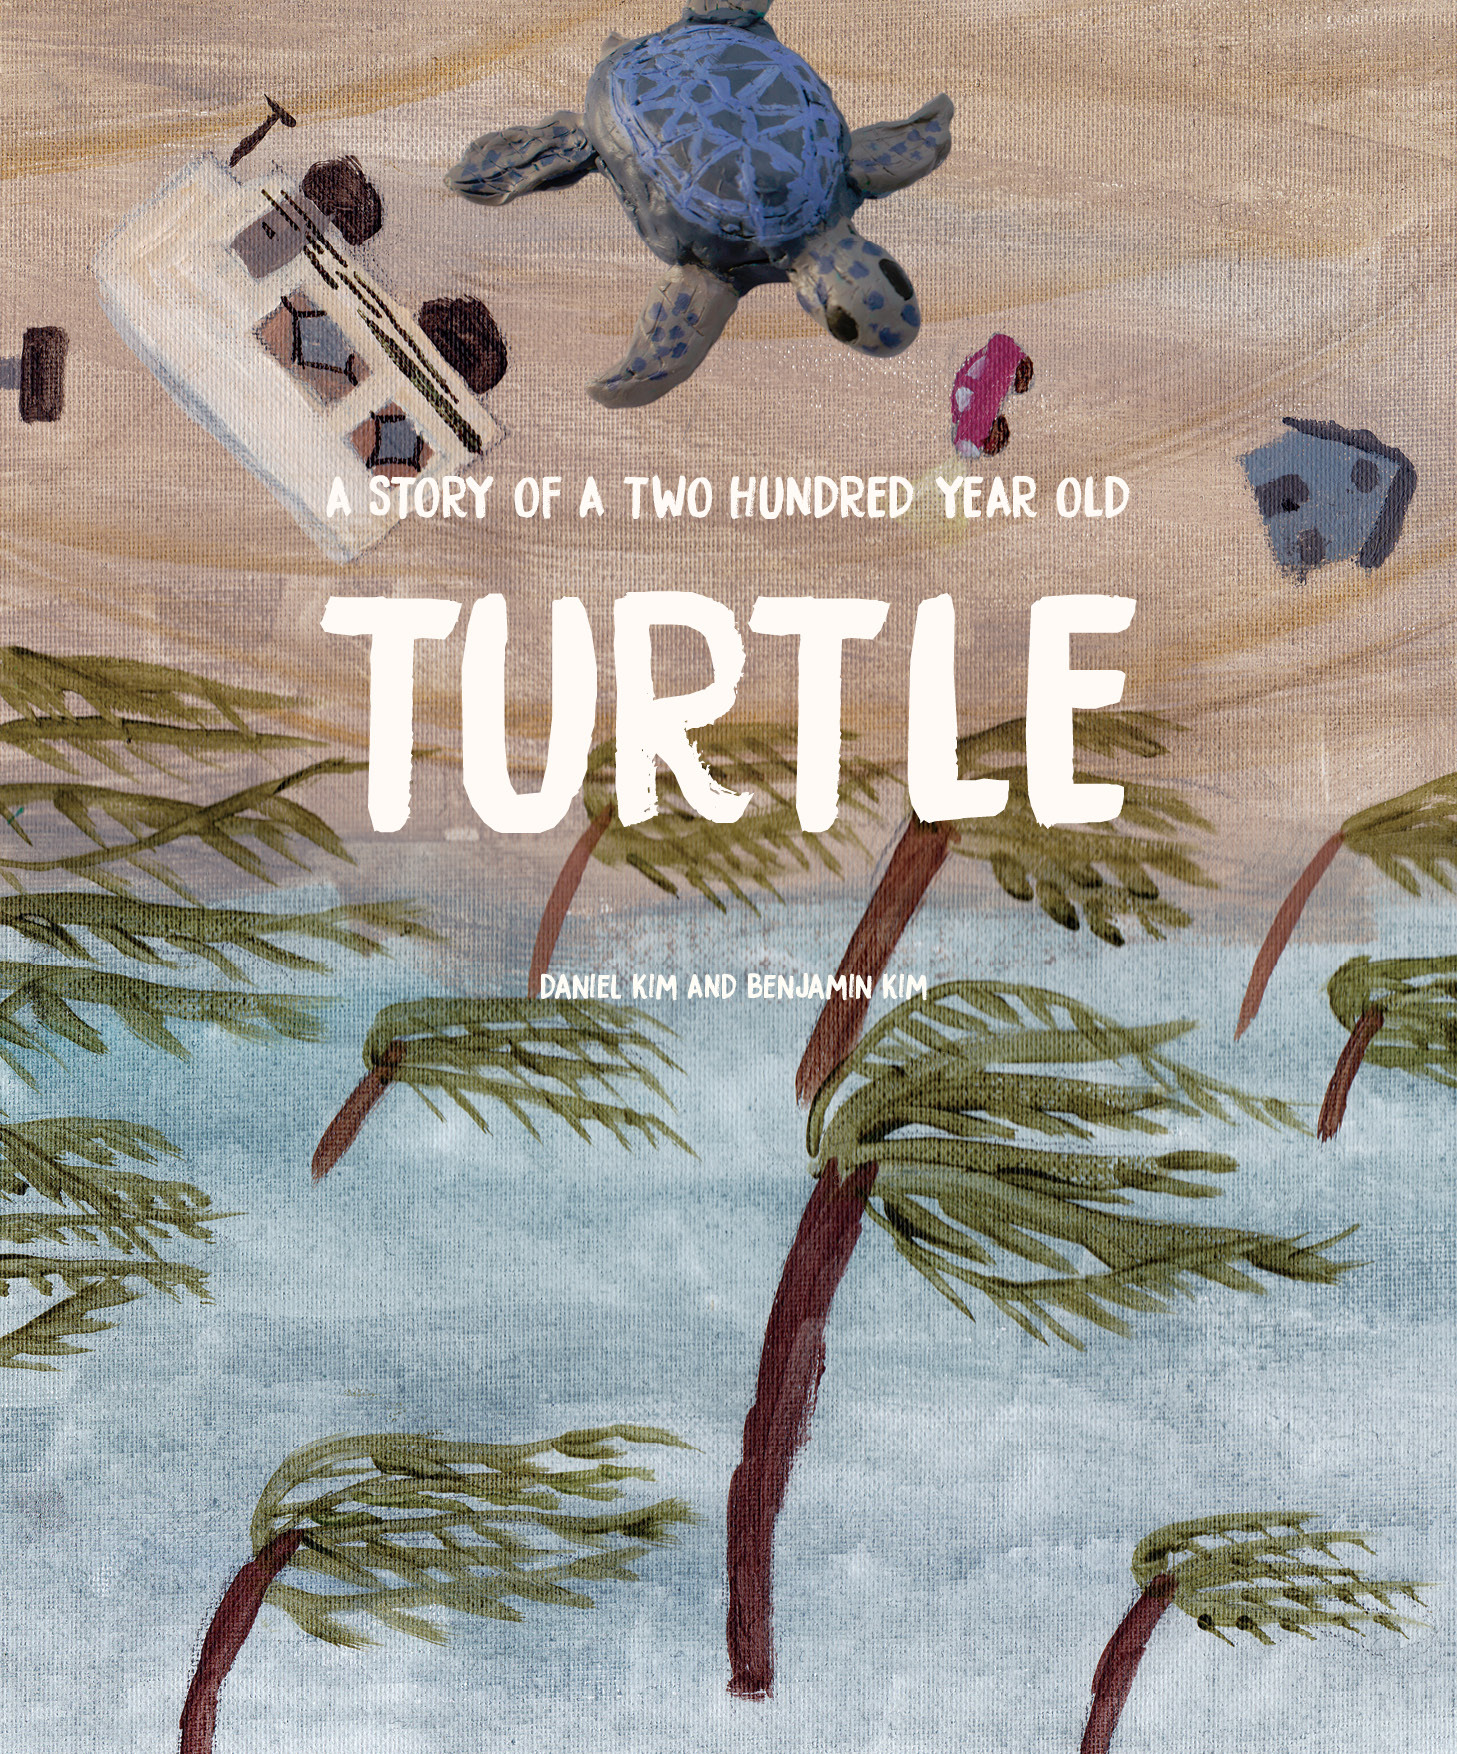 A Story of a Two Hundred Year Old Turtle